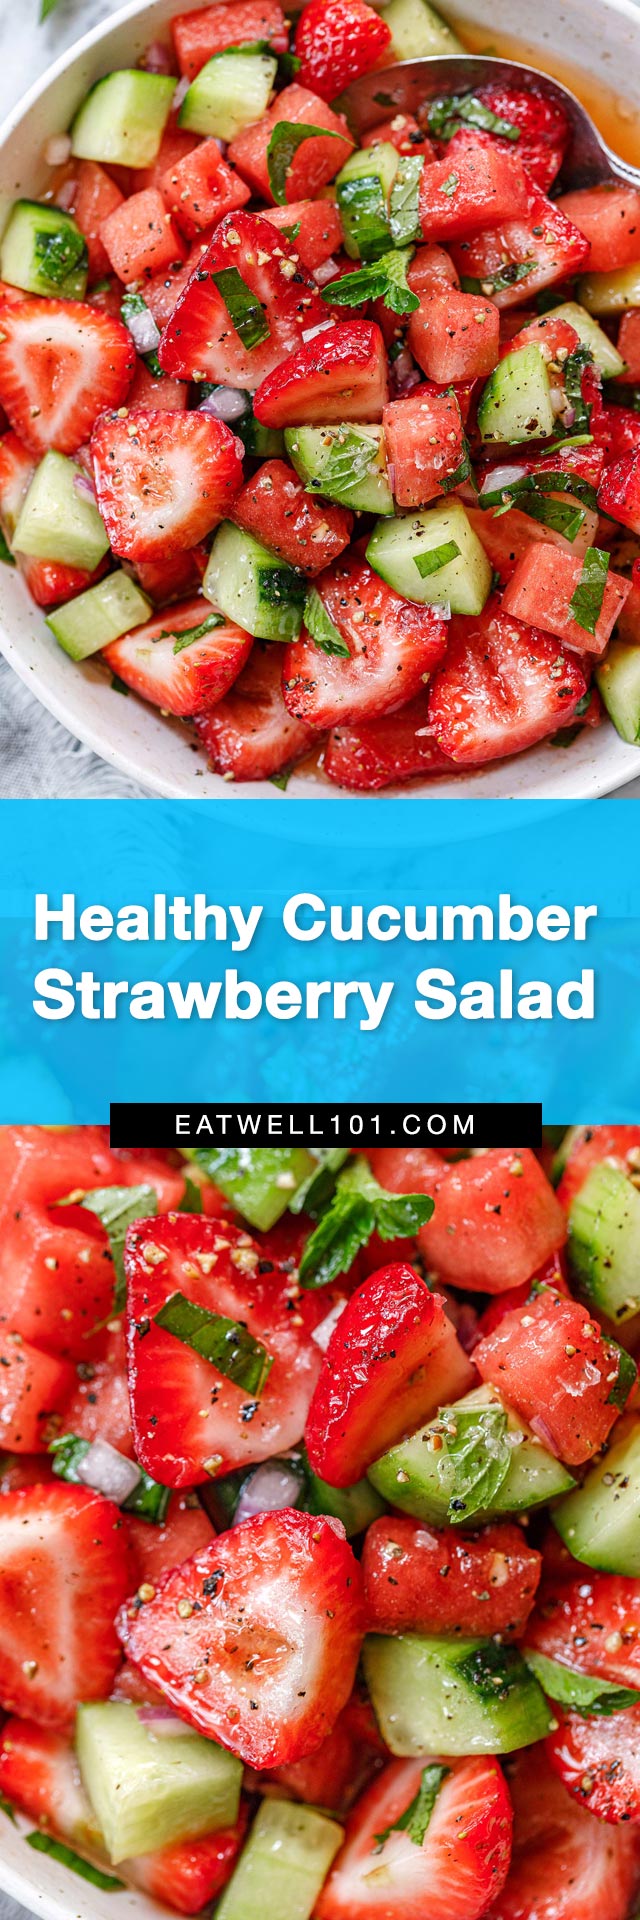 Cucumber Strawberry Salad- #strawberry #salad #recipe #eatwell101 - This watermelon salad with cucumber and strawberry is the perfect summer side to serve with grilled chicken or steak. 